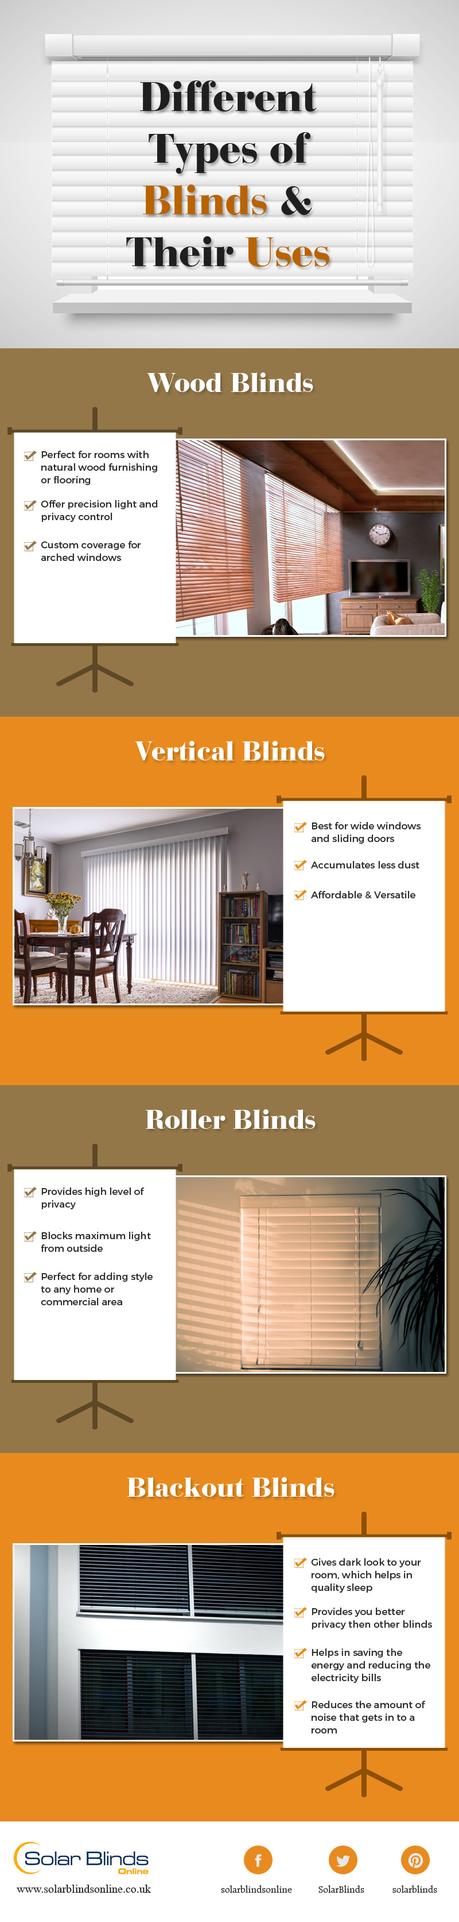 Different Types of Blinds and Their Uses – Infographic